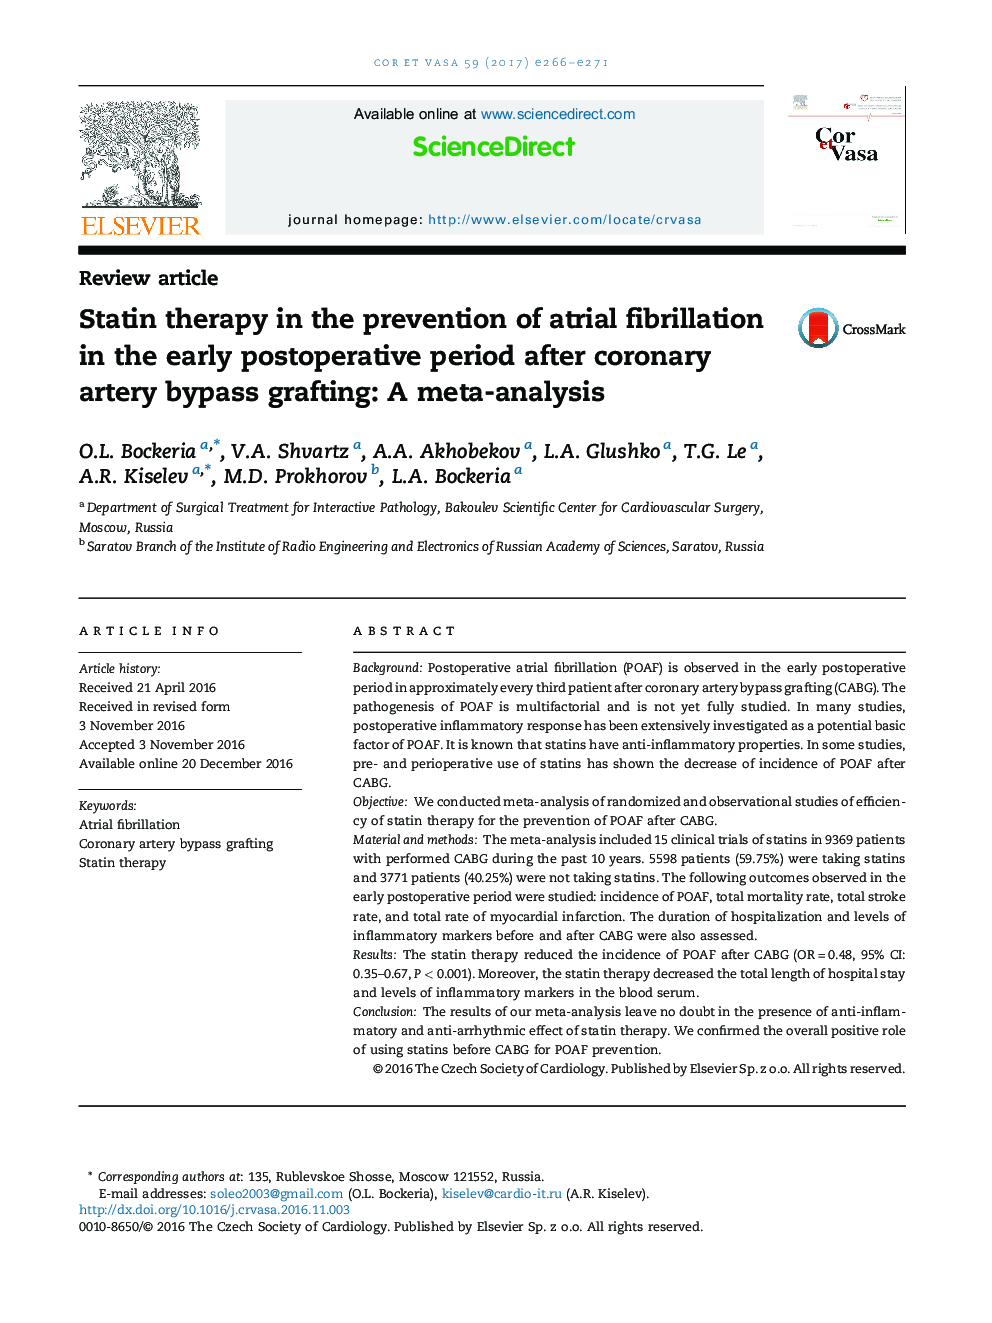 Statin therapy in the prevention of atrial fibrillation in the early postoperative period after coronary artery bypass grafting: A meta-analysis